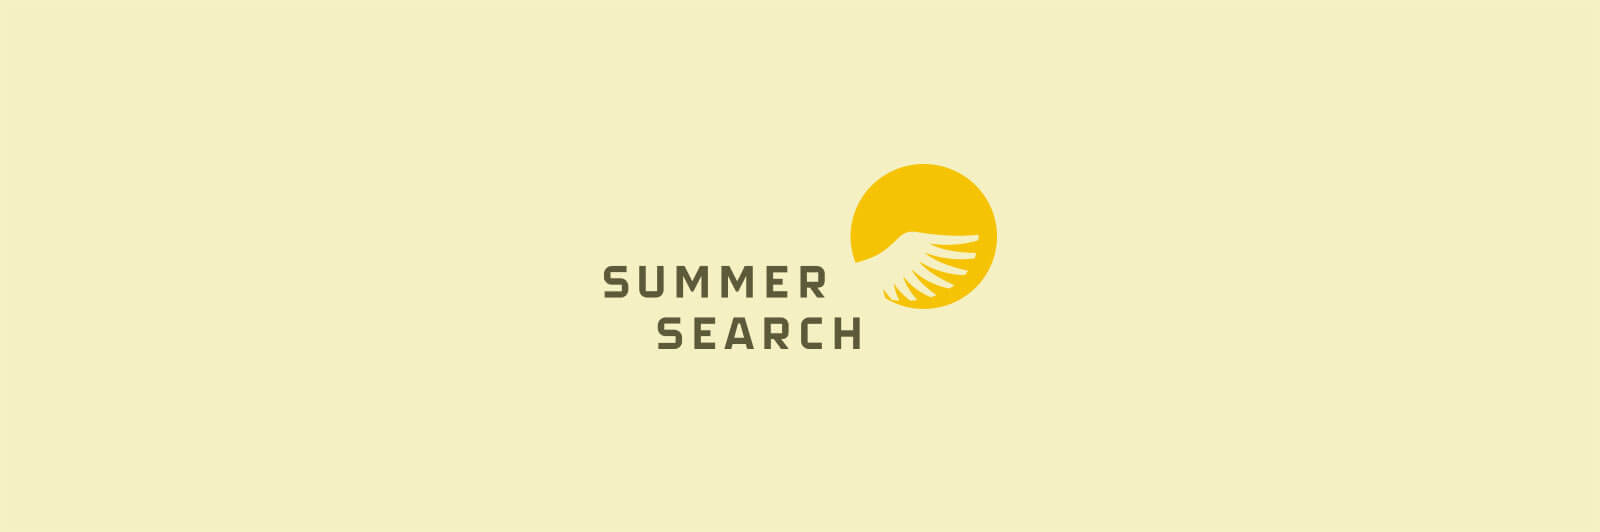 Summer Search logotype with wing-in-sun logo mark on light yellow background